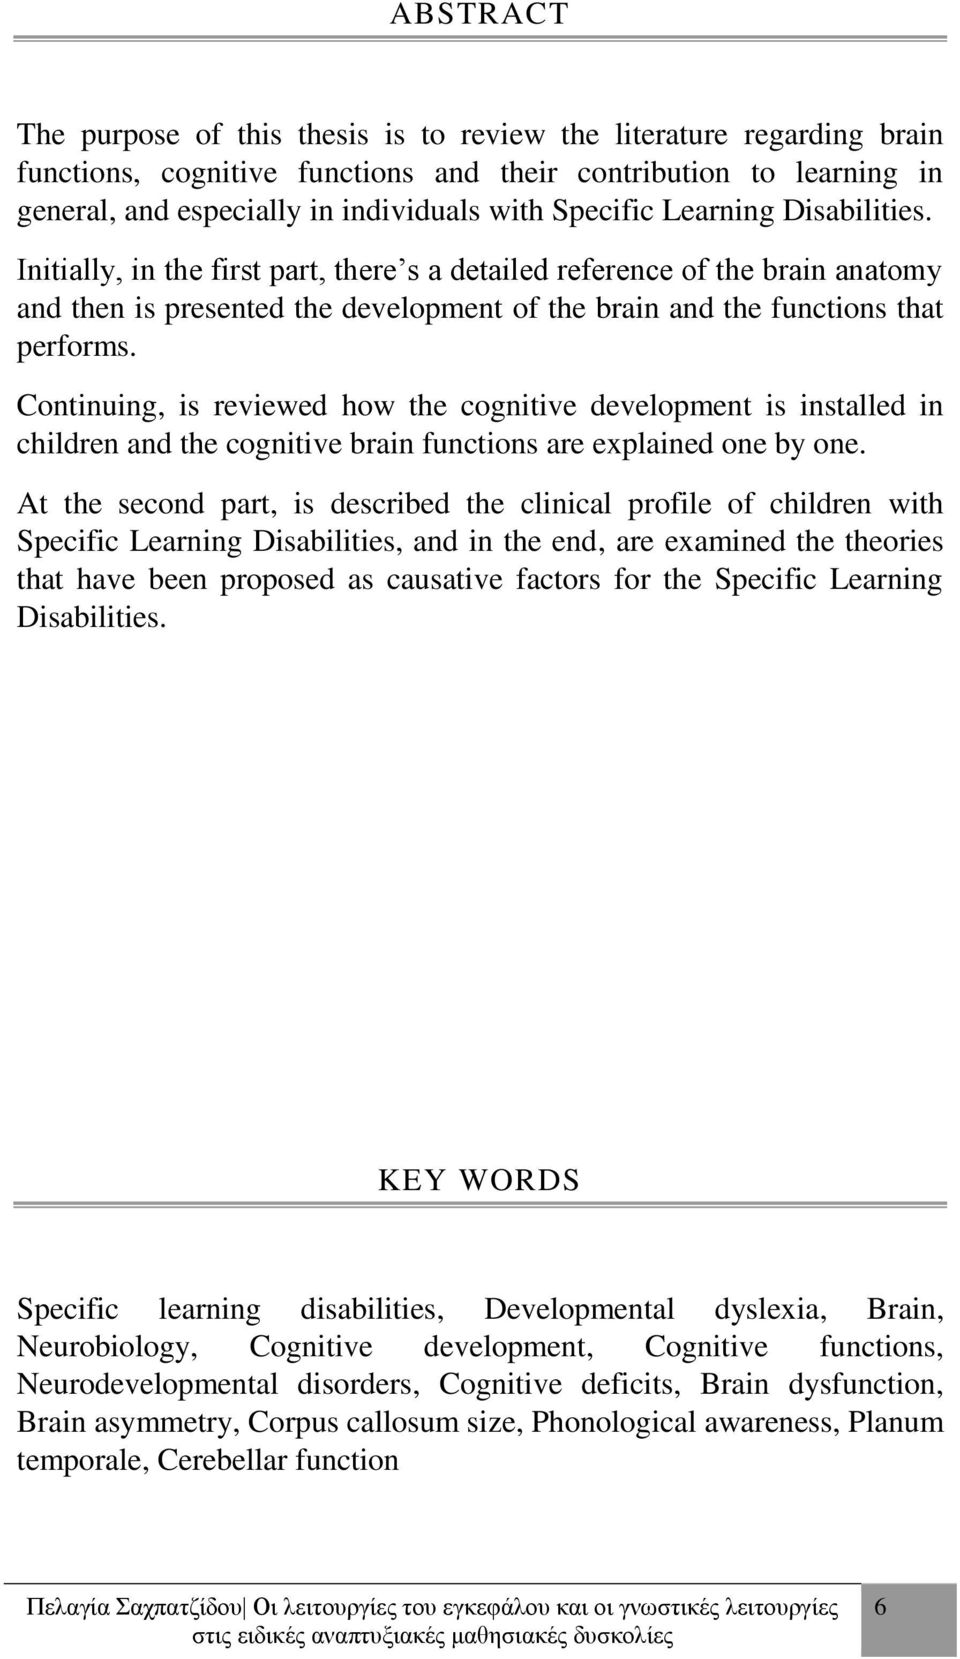 Continuing, is reviewed how the cognitive development is installed in children and the cognitive brain functions are explained one by one.